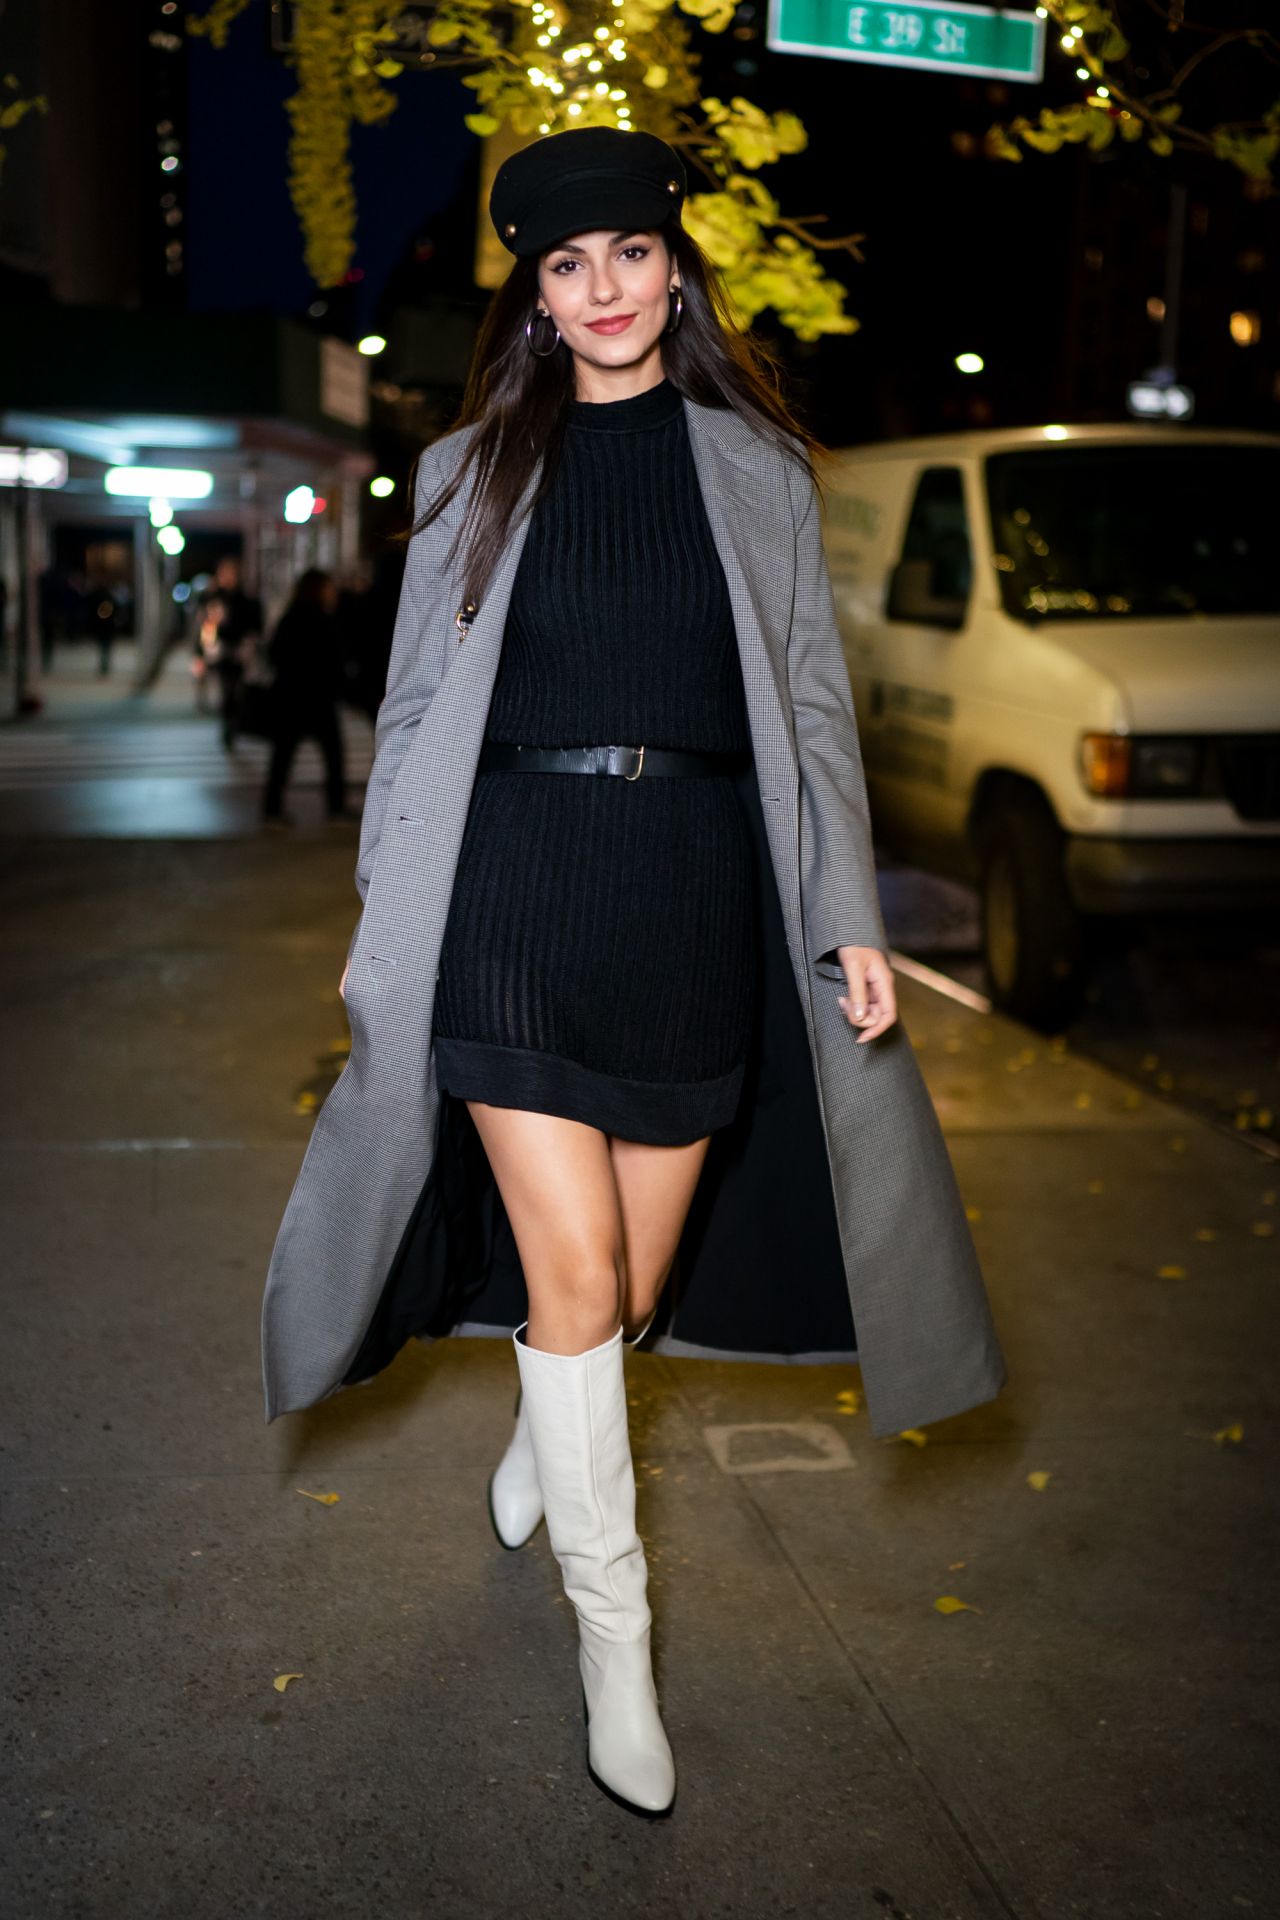 Victoria Justice London June 1, 2018 – Star Style